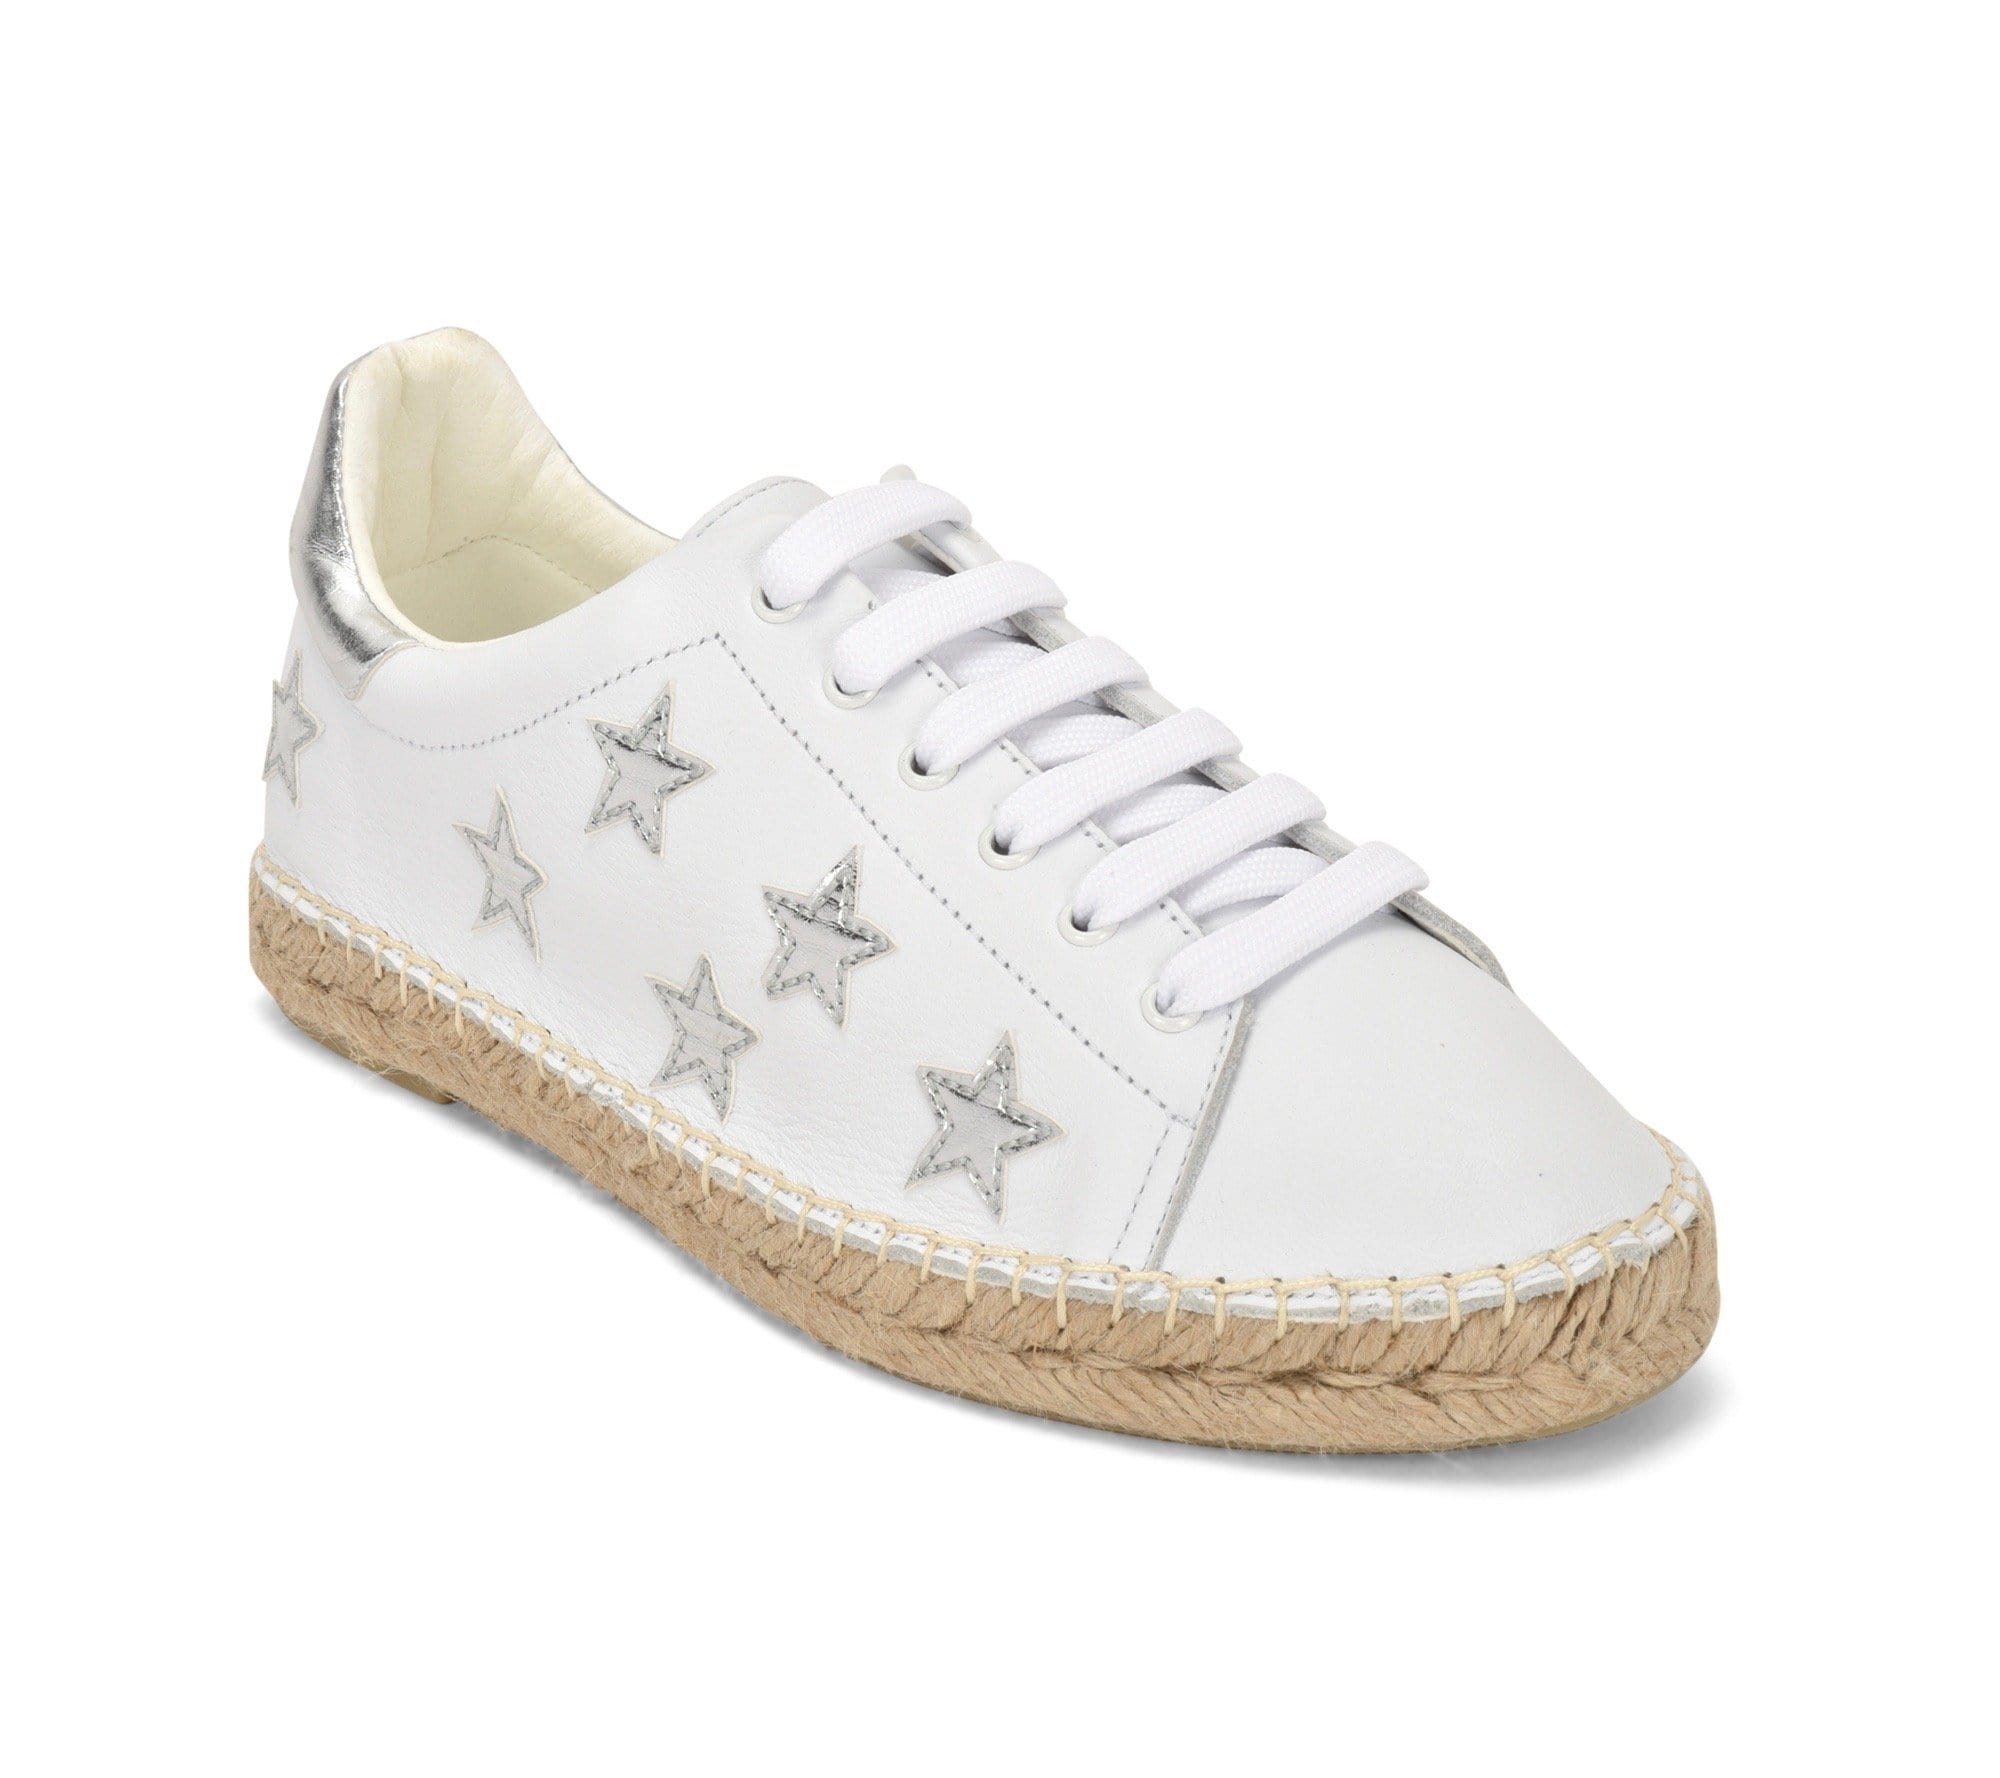 white leather espadrille sneakers